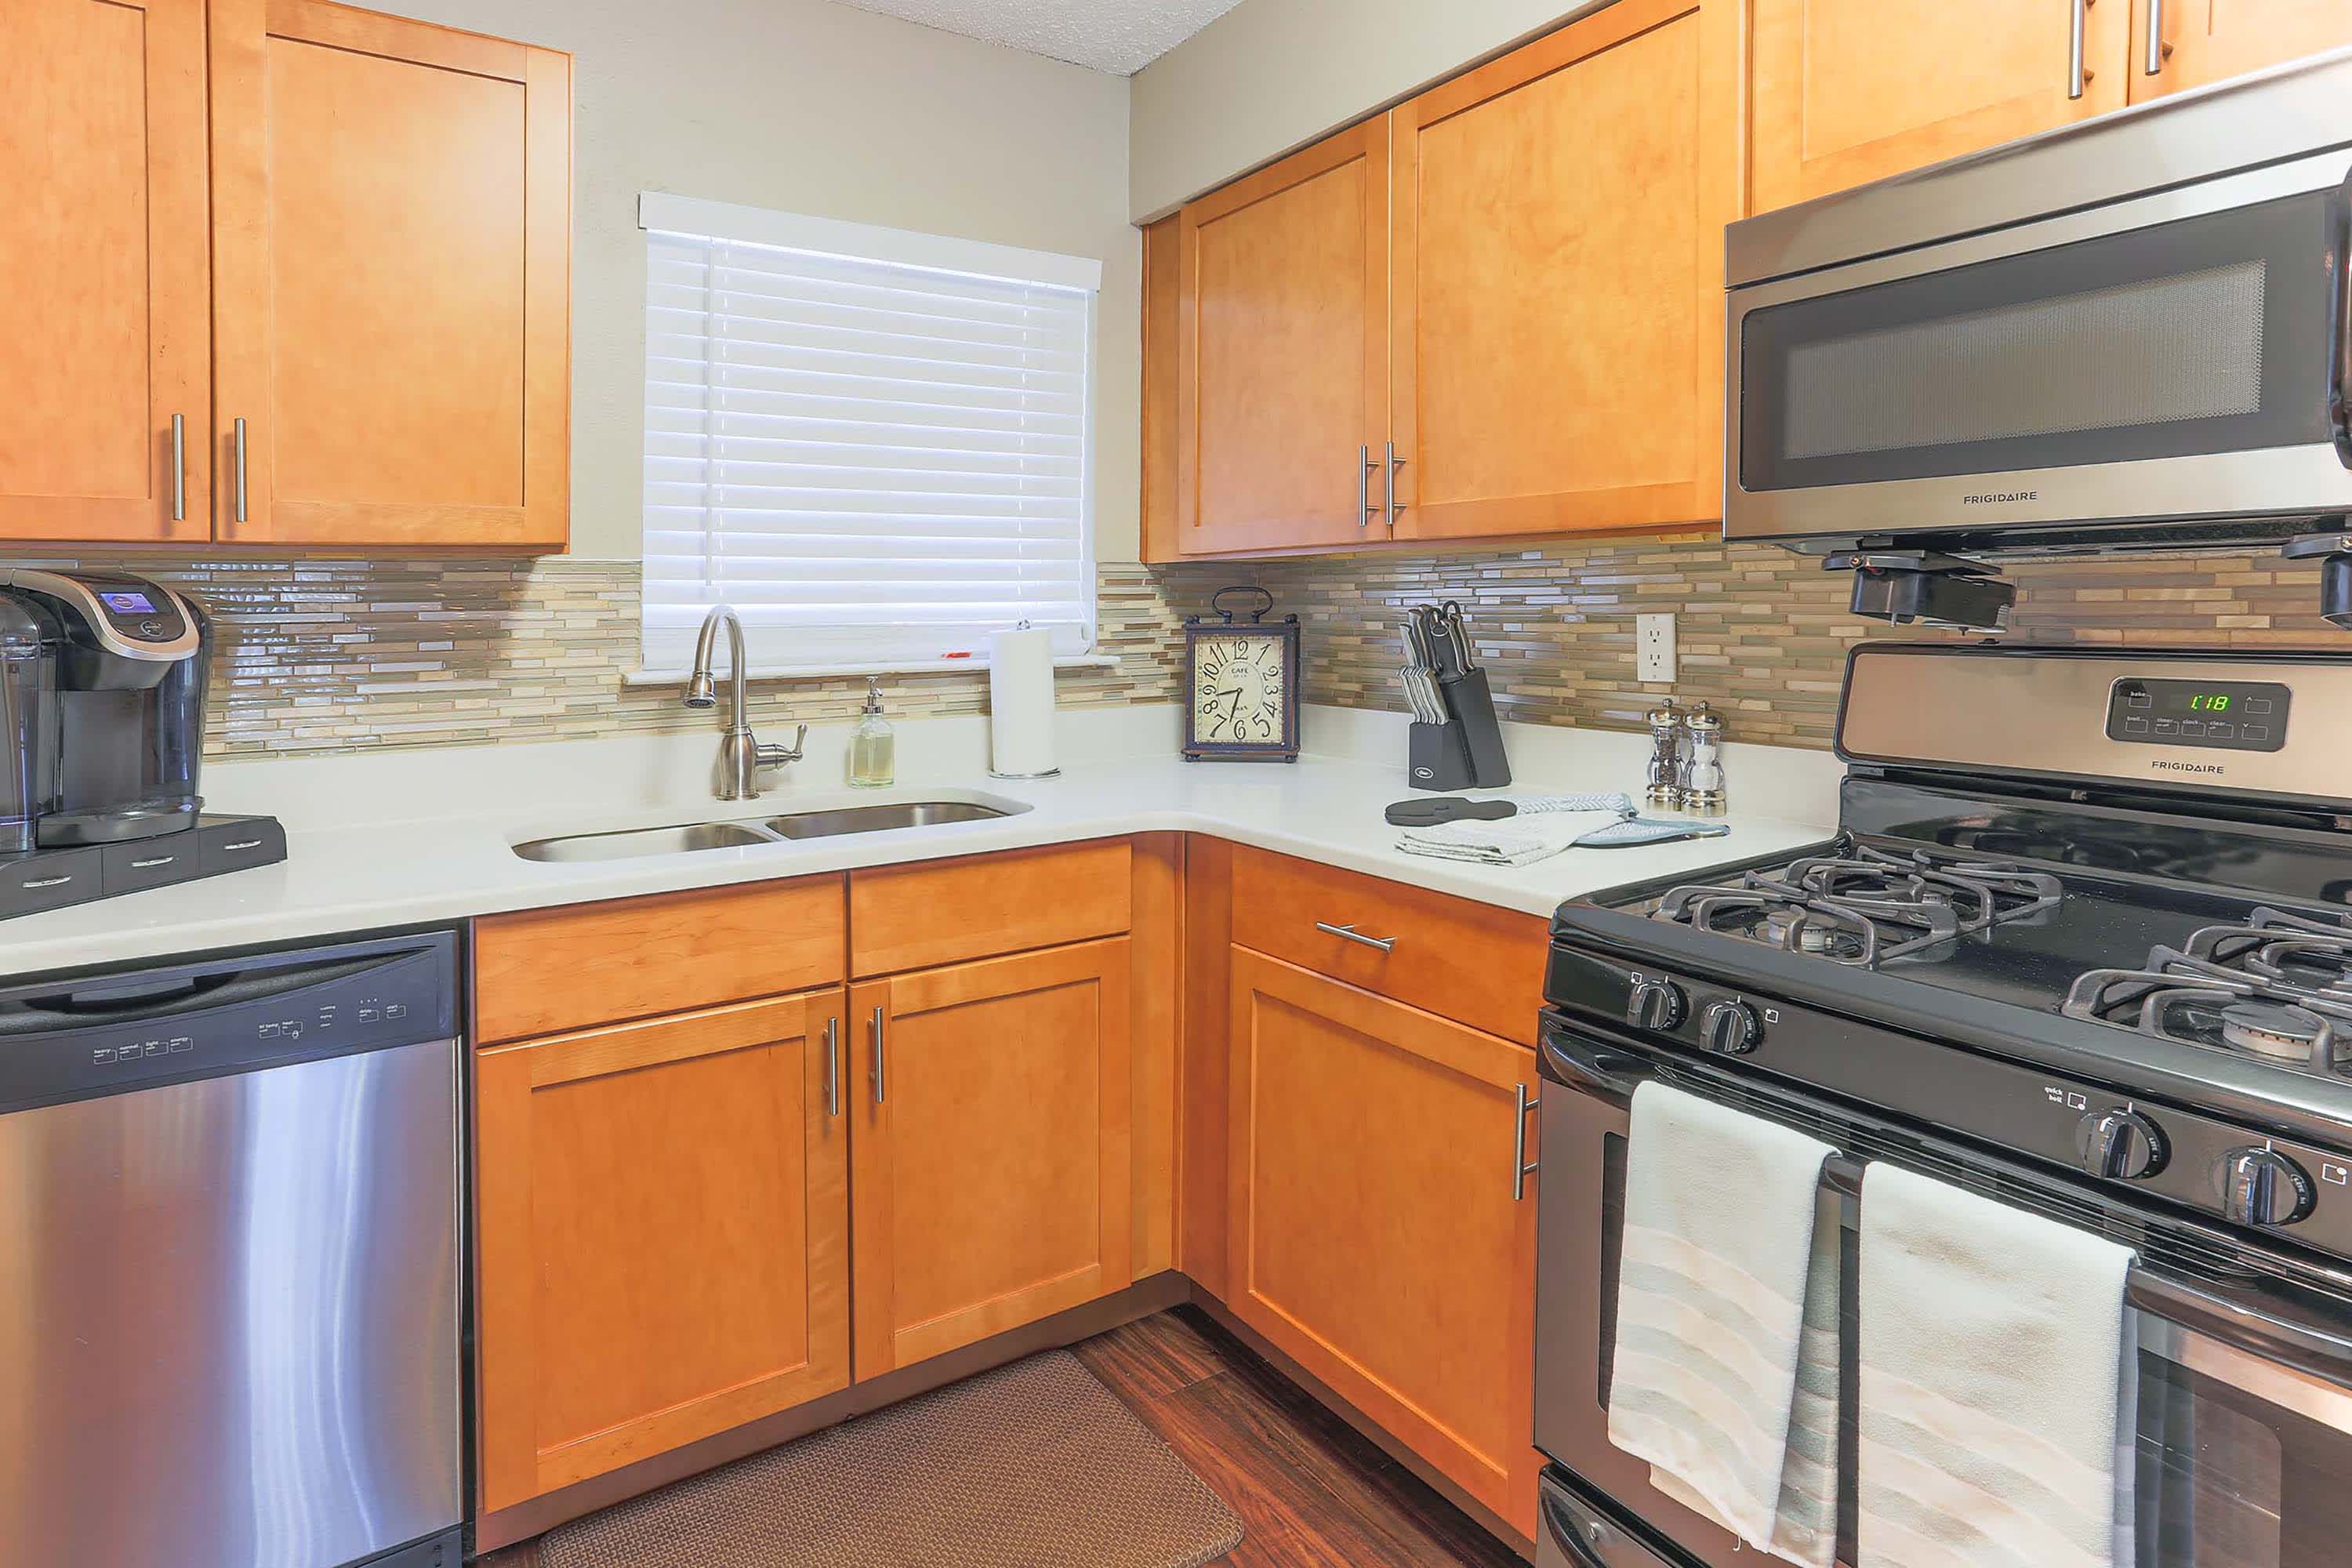 Discovery - 2 Bed 2 Bath - Kitchen - Shaker style Cabinets